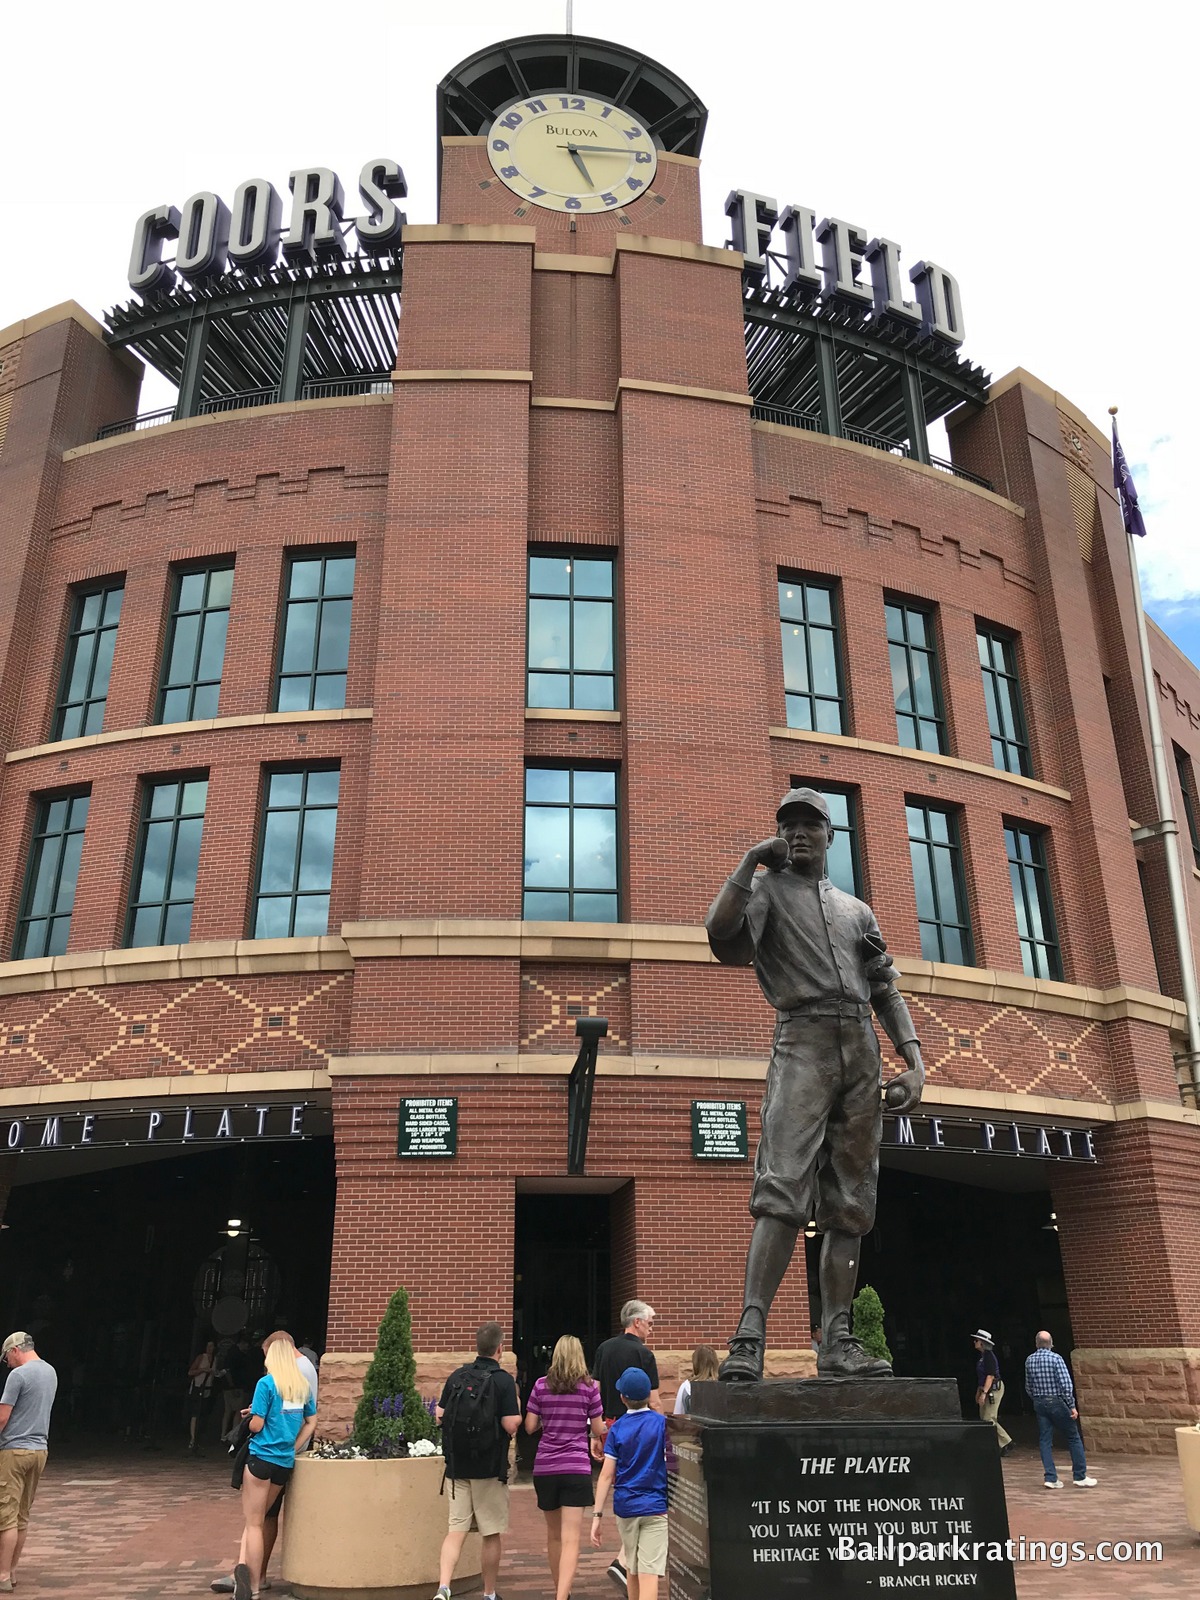 "The Player" statue Coors Field